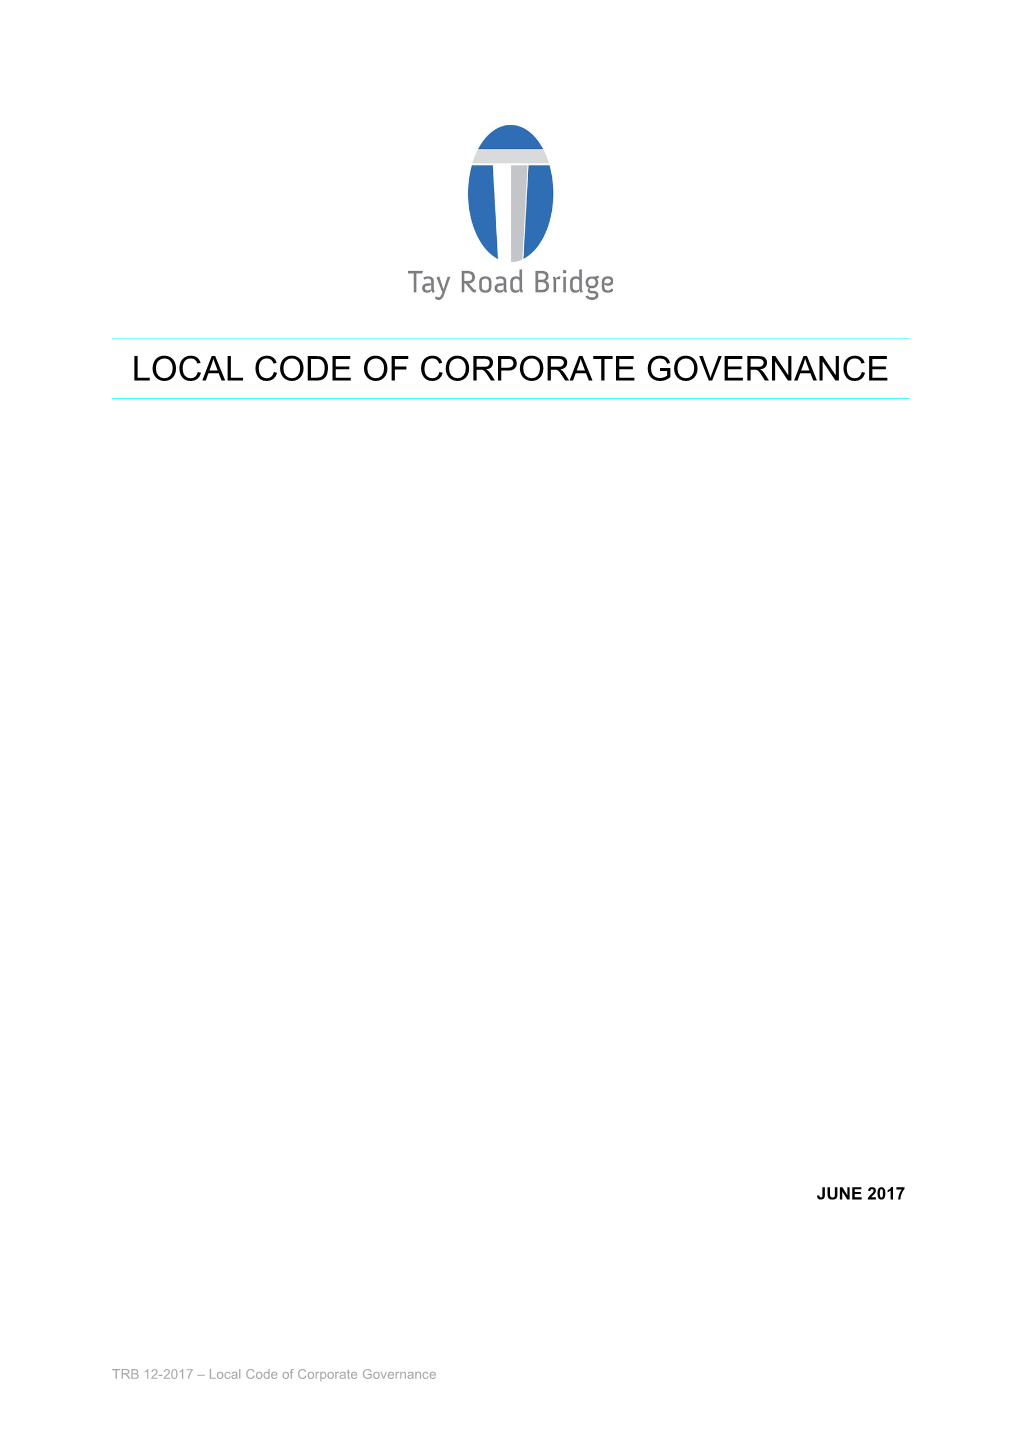 Local Code of Corporate Governance